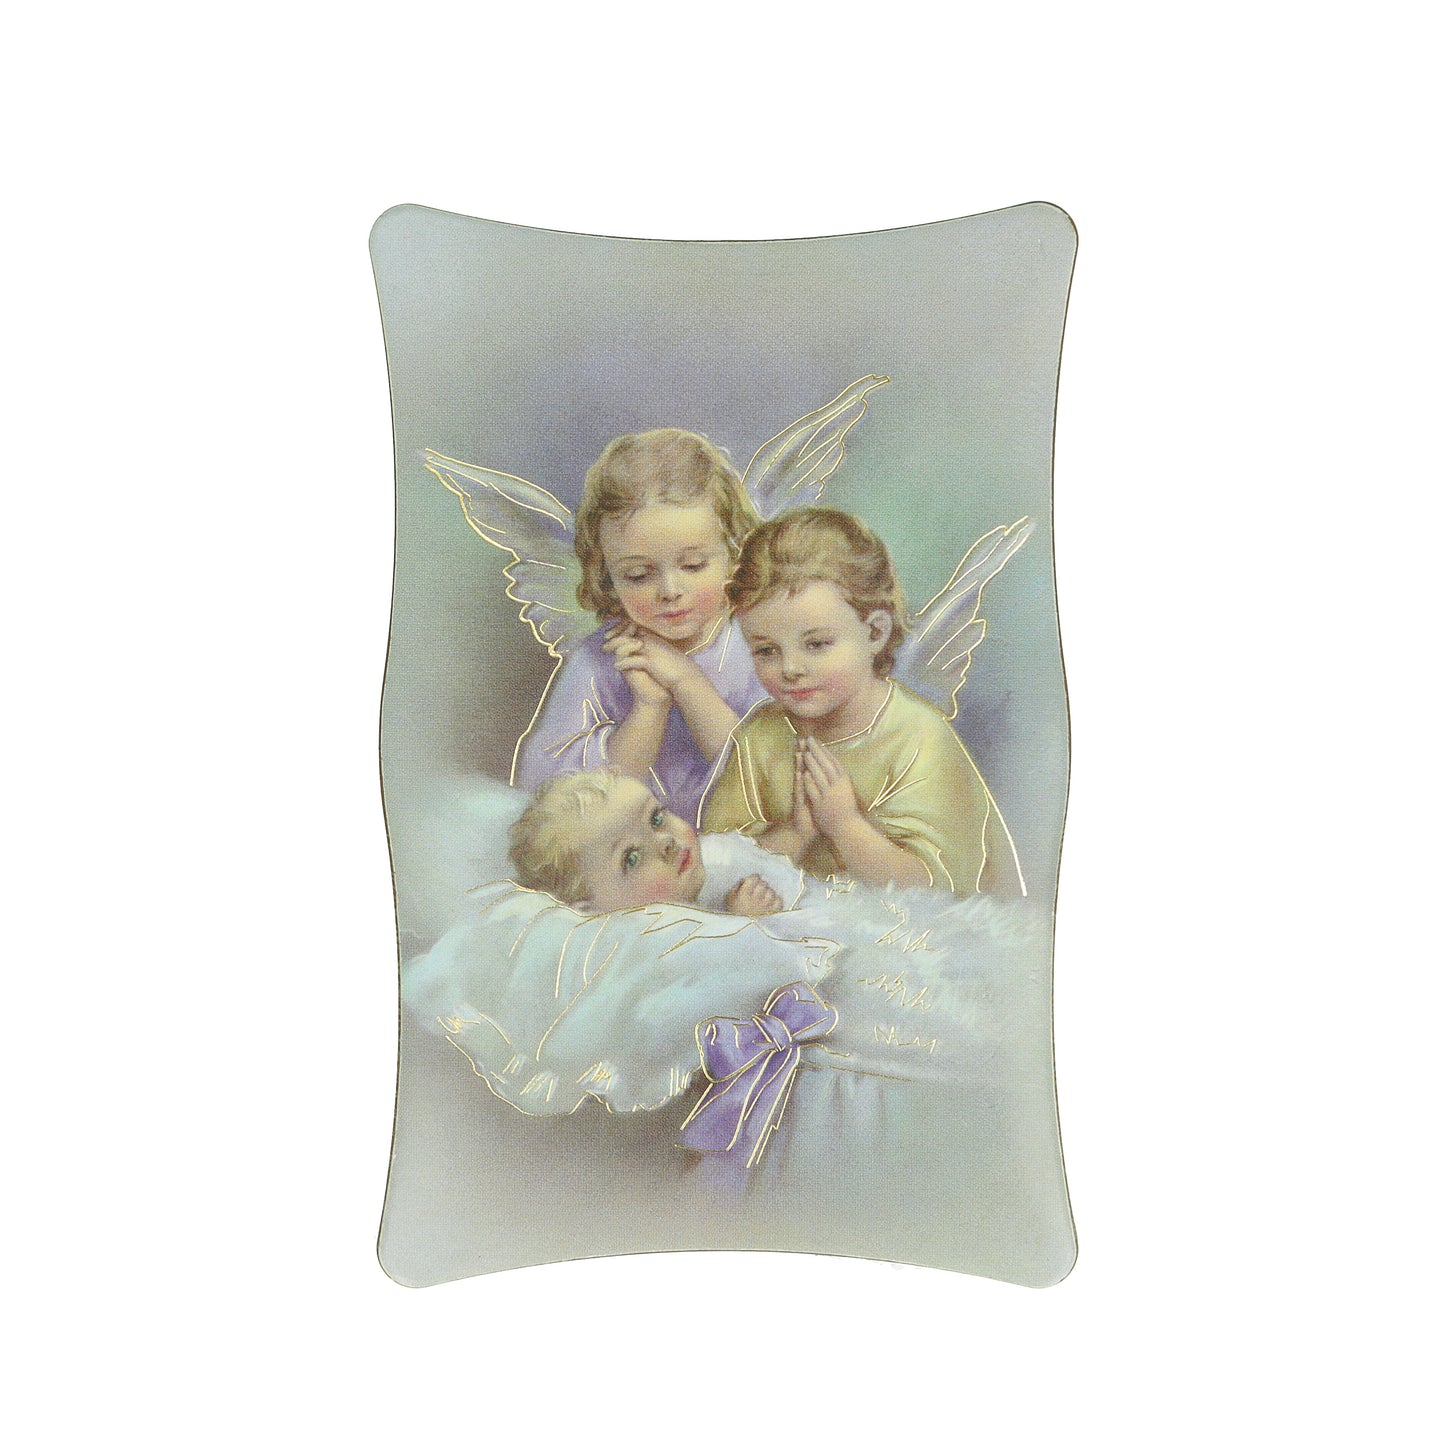 Religion Child with Angels Framed Simil Wood Resin Souvenir